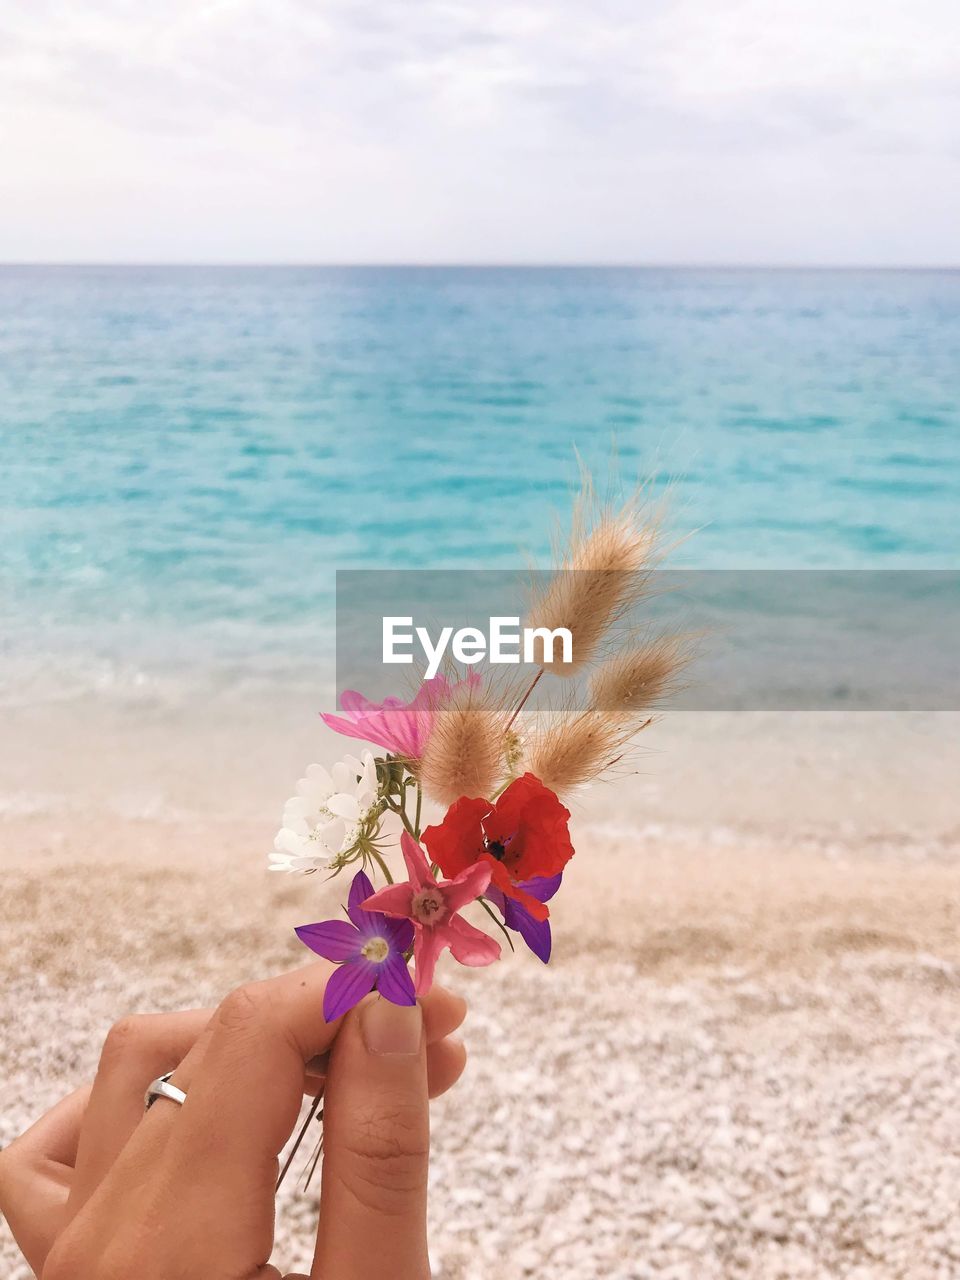 Cropped hand of woman holding flowering plant against sea